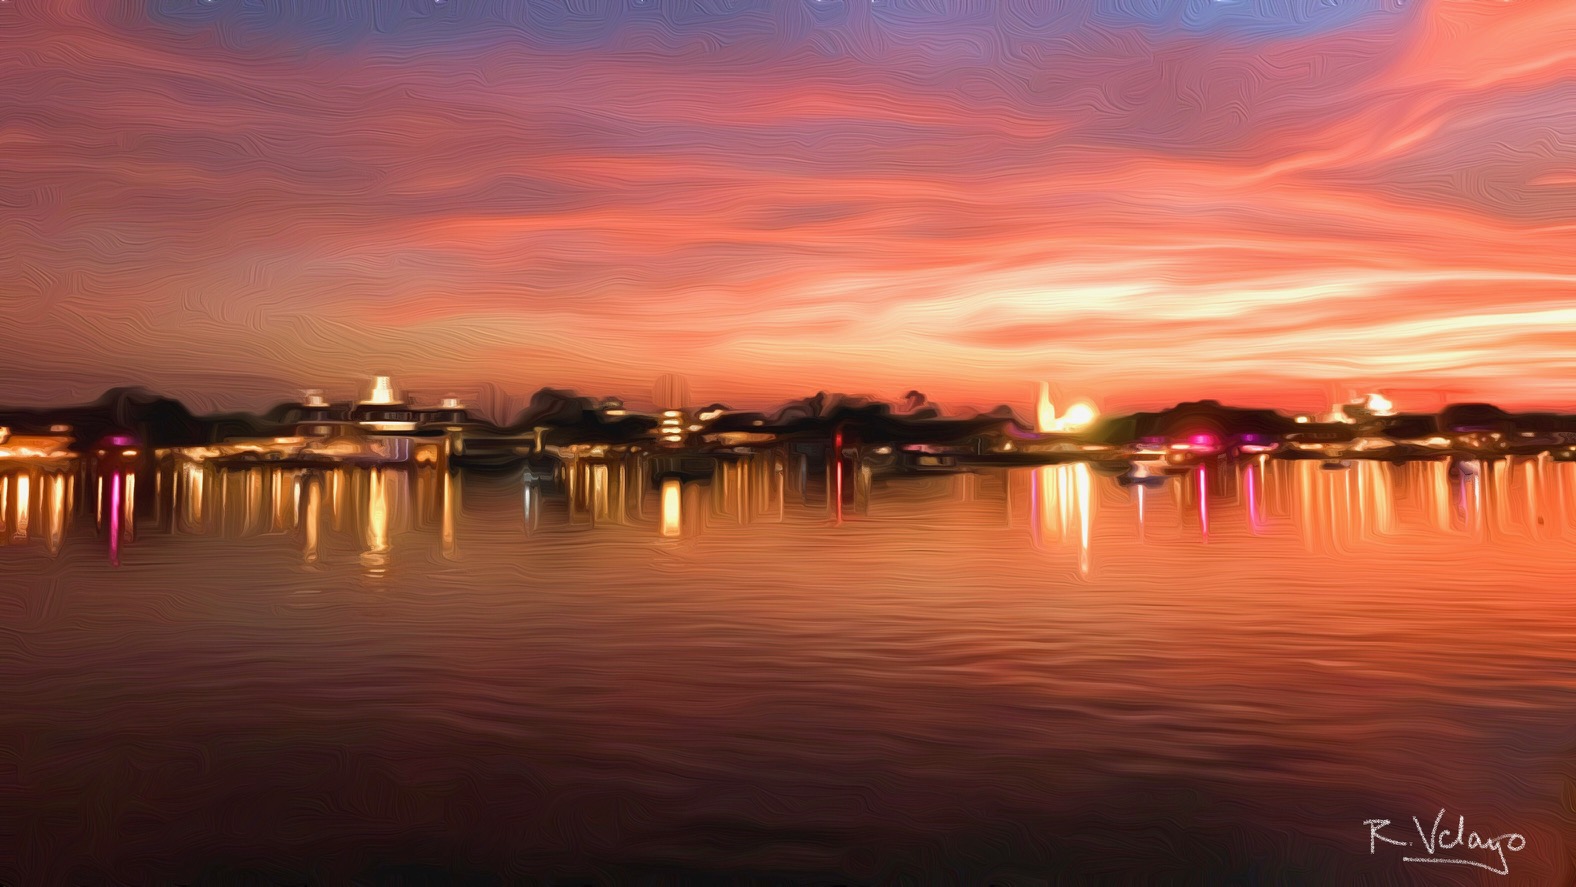 "WORLD SHOWCASE IN EPCOT AT DUSK" [Created: 3/19/2021]